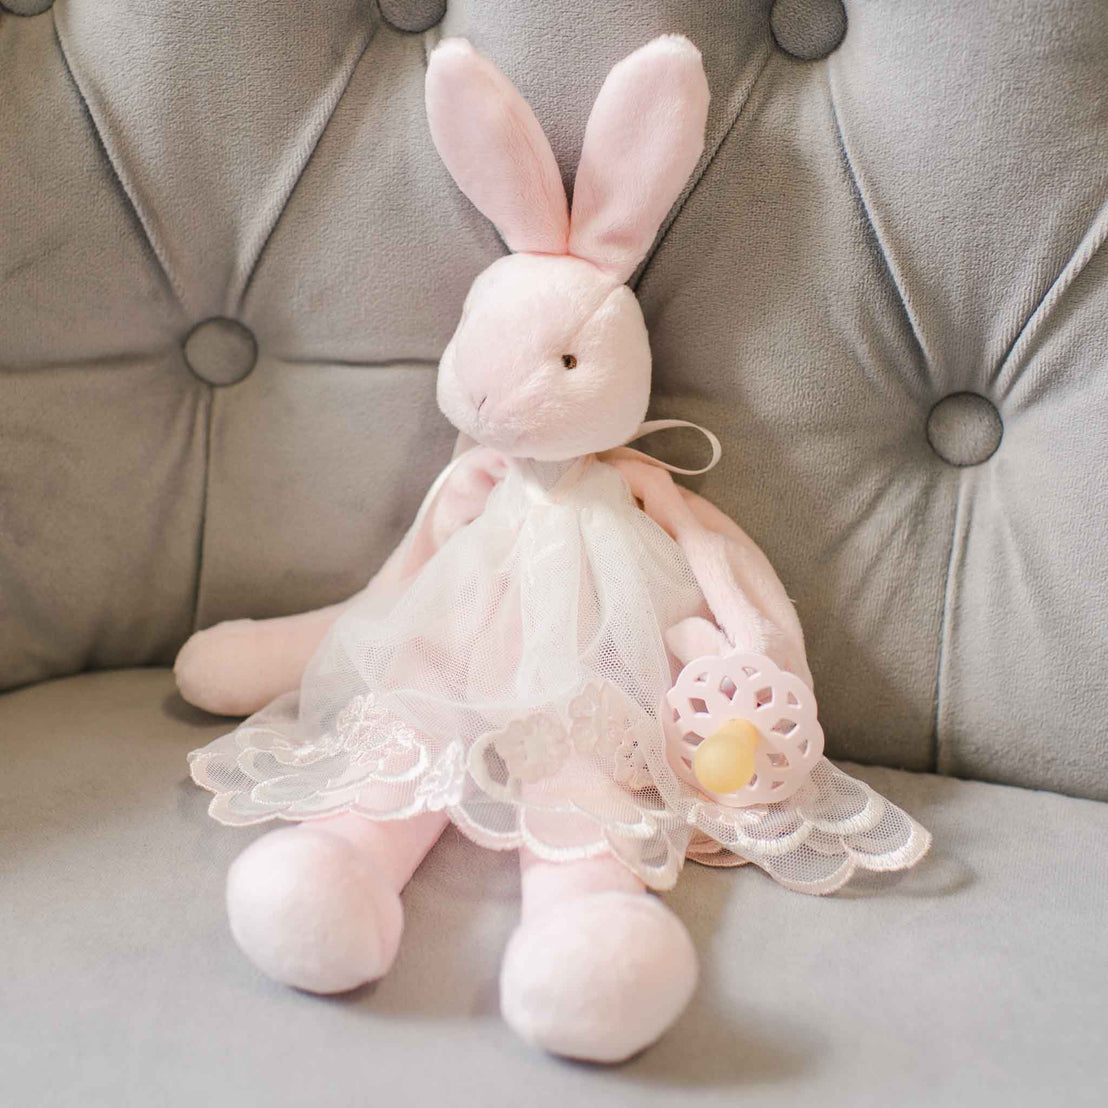 A Joli Silly Bunny Buddy Pacifier Holder dressed in a delicate white lace dress sits on a gray tufted sofa, holding a vintage-inspired yellow and pink Easter egg.